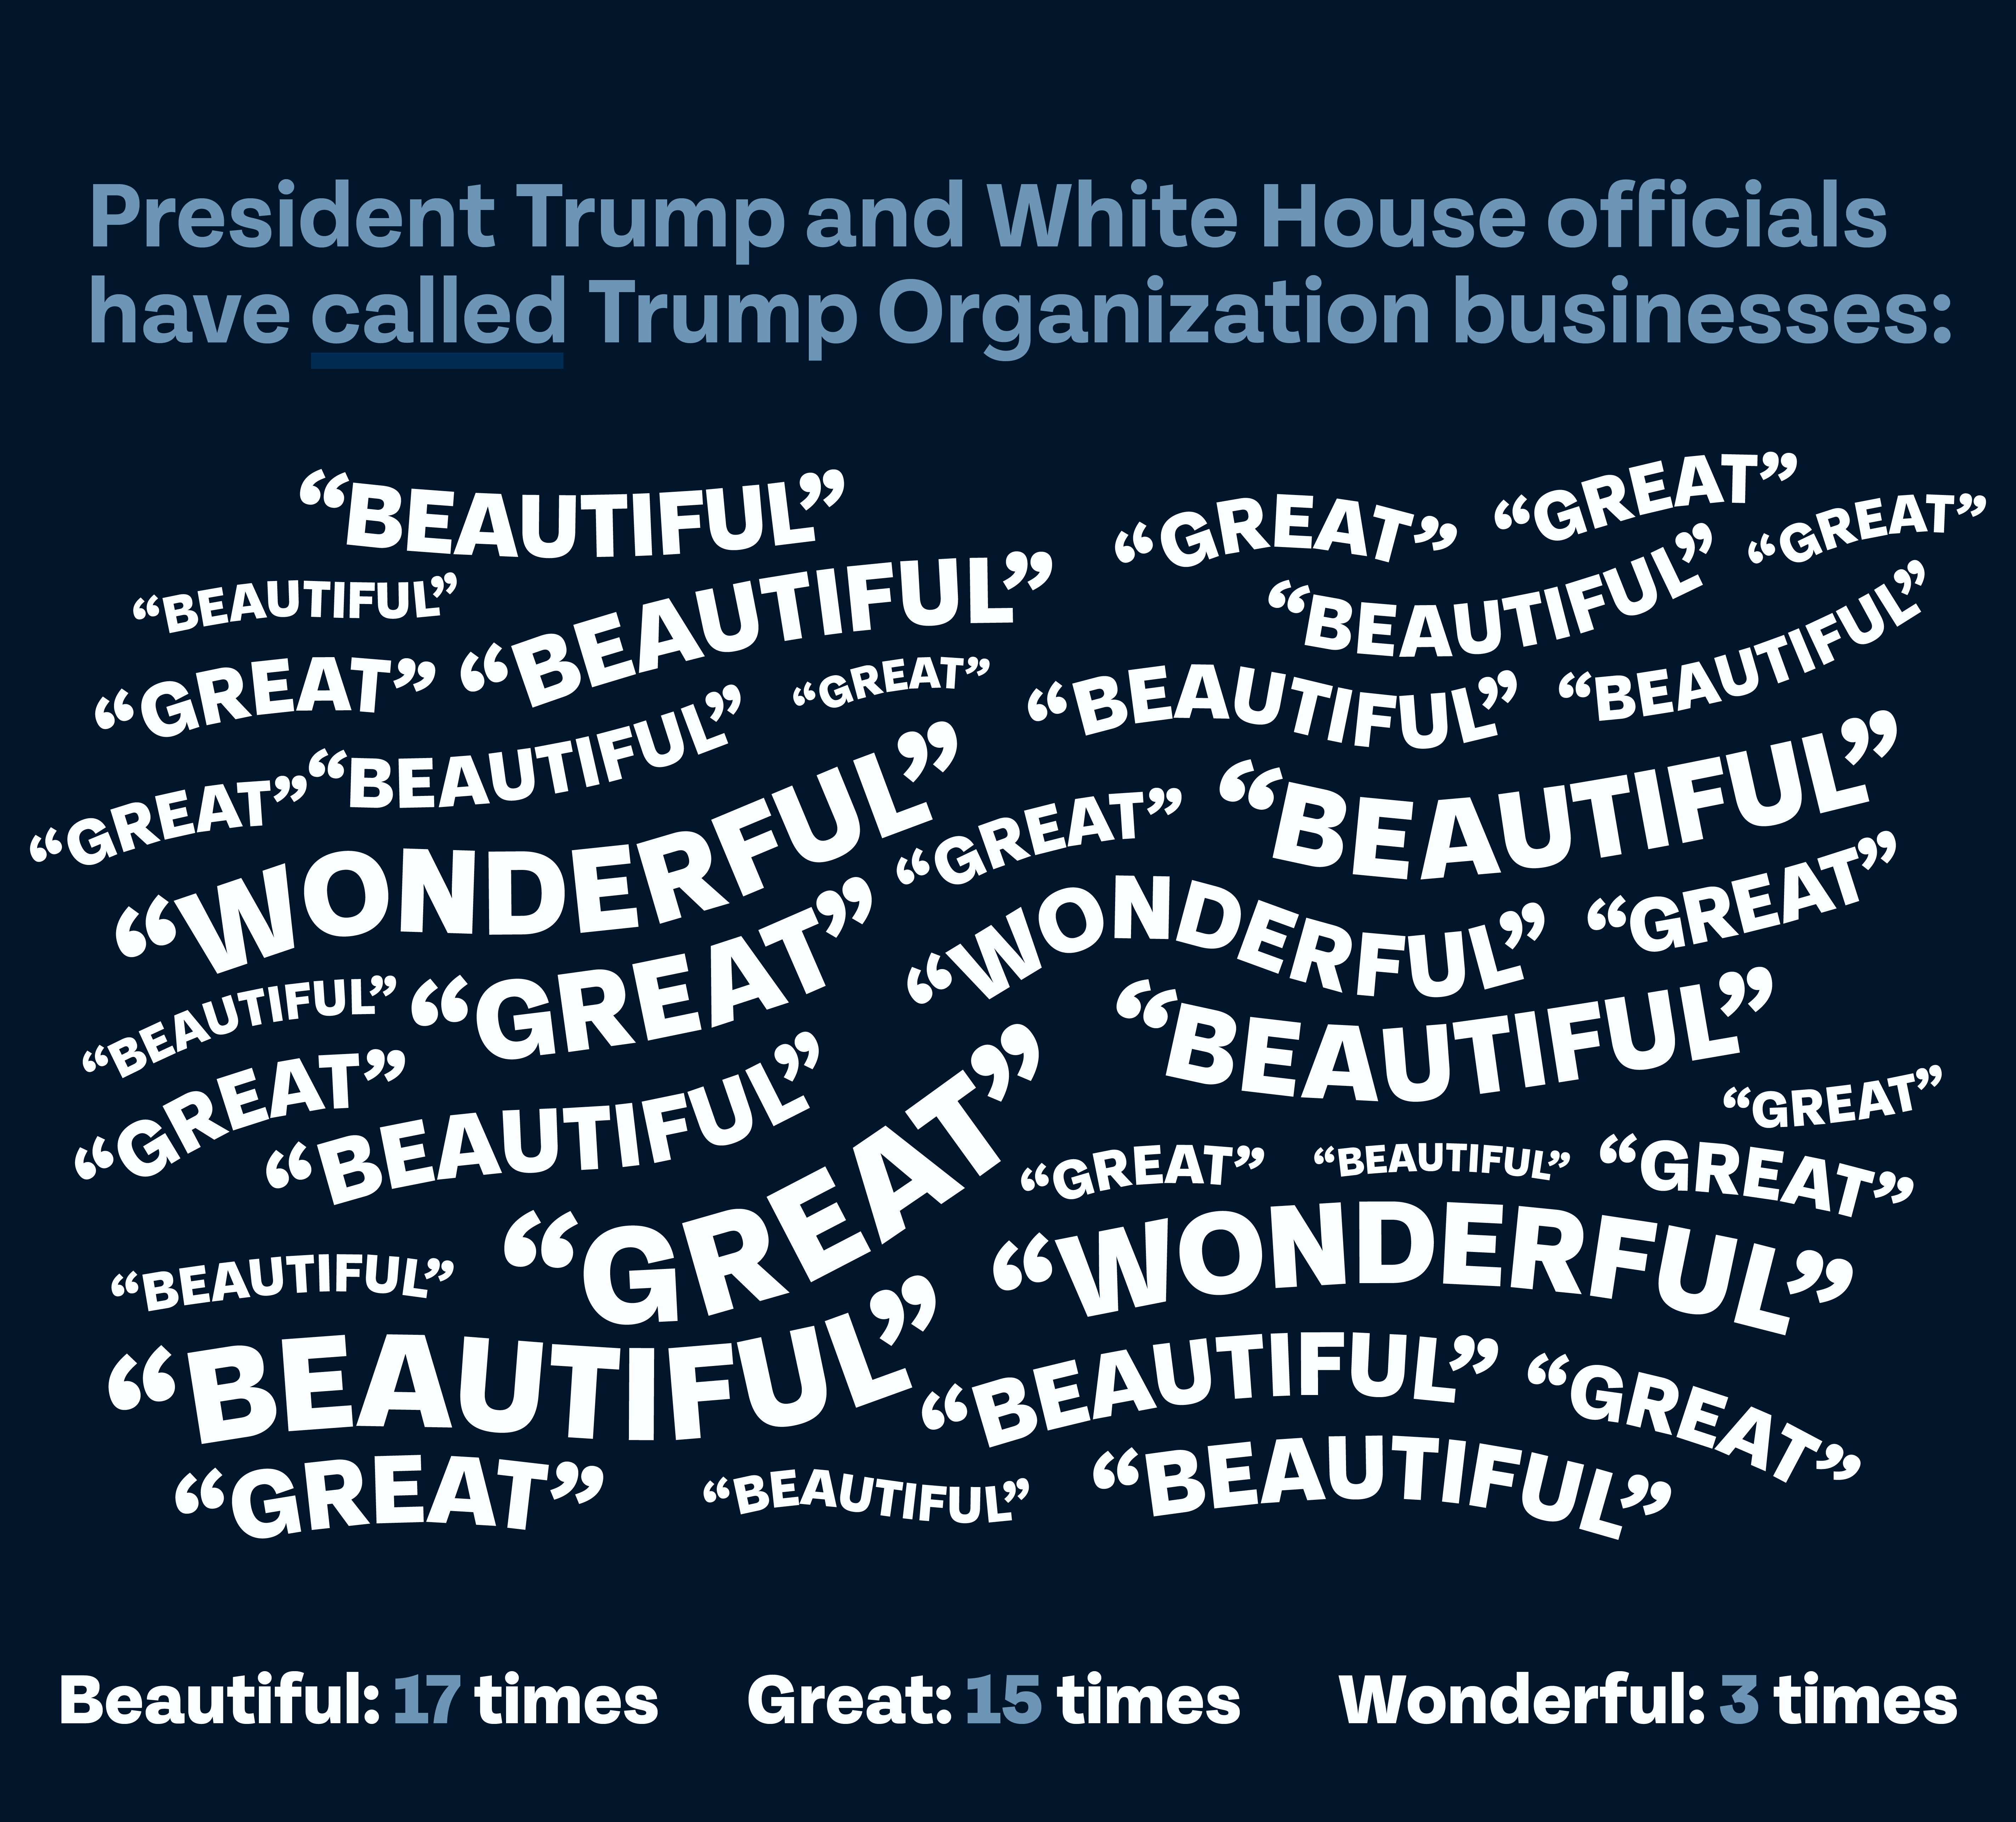 Title: "President Trump and White House officials have called Trump Organization businesses:" Caption: "Beautiful: 17 times; Great: 15 times; Wonderful: 3 times" Word cloud of all those words below title and between caption. Text is light blue and white and background is navy.